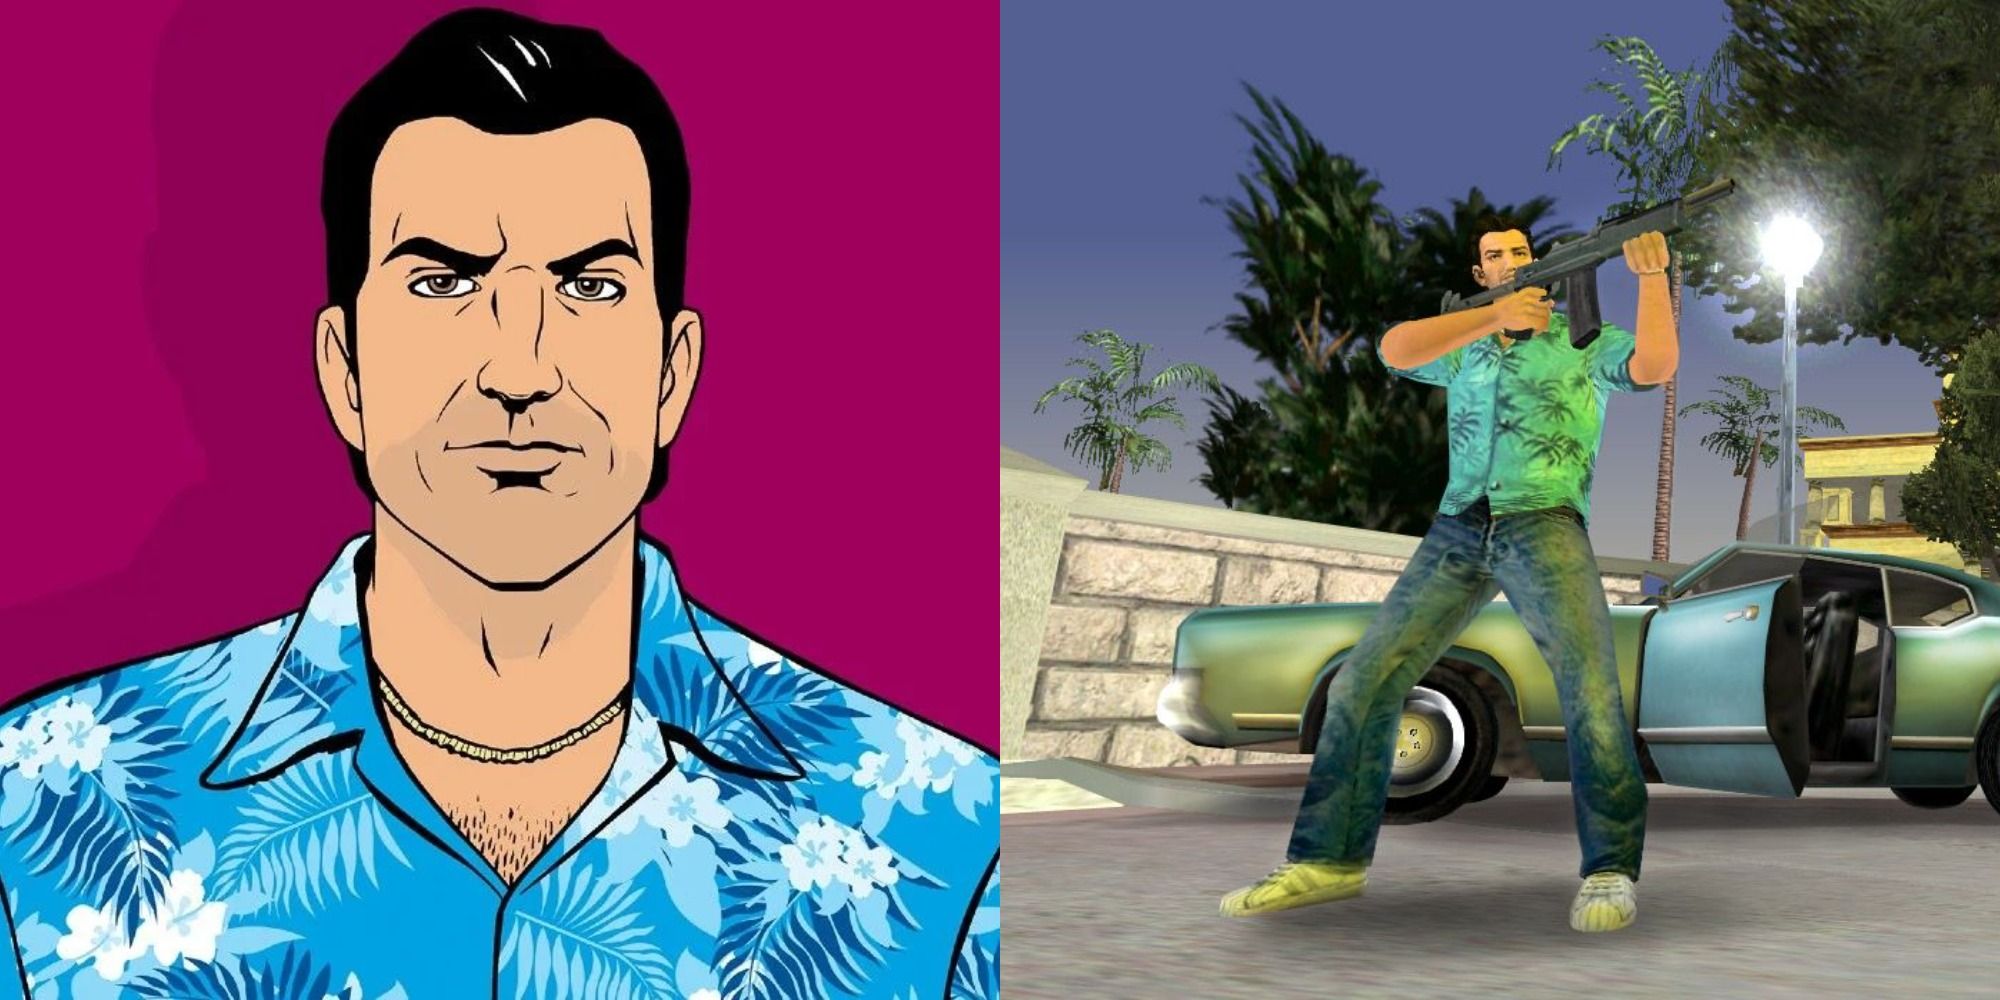 Tommy Vercetti profile image and Tommy firing a gun in the game in GTA Vice City